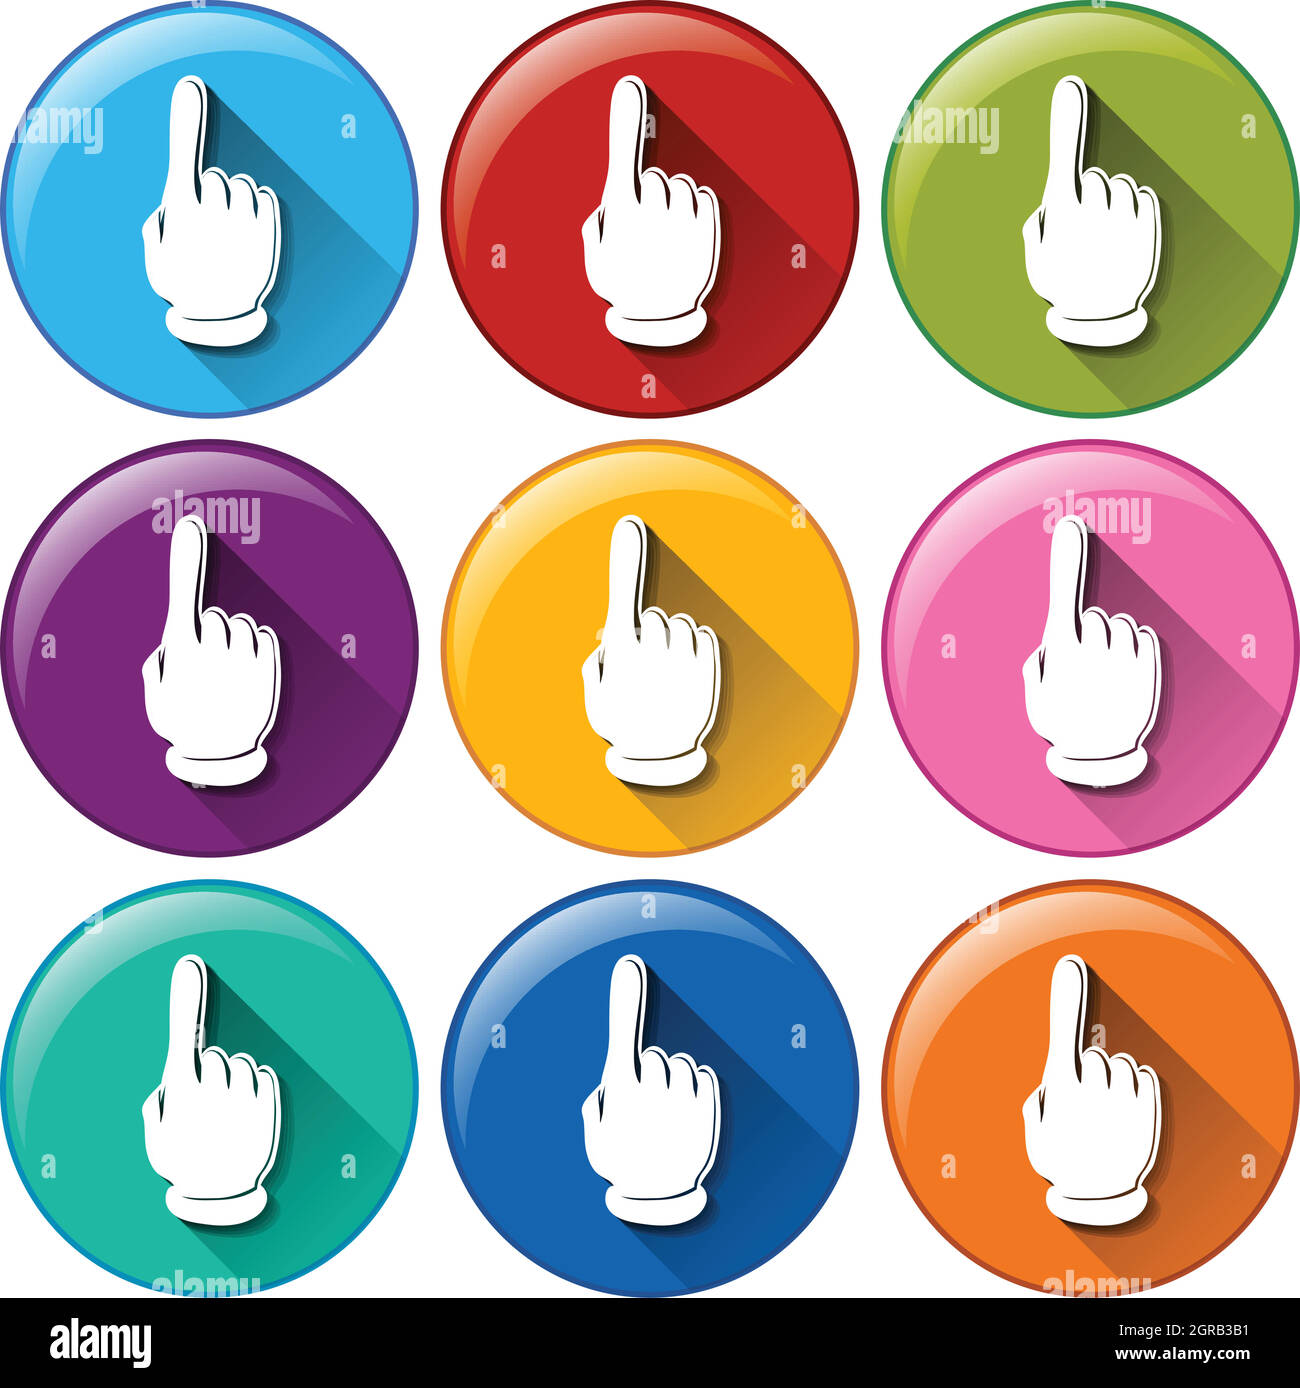 Buttons with fingers pointing upwards Stock Vector